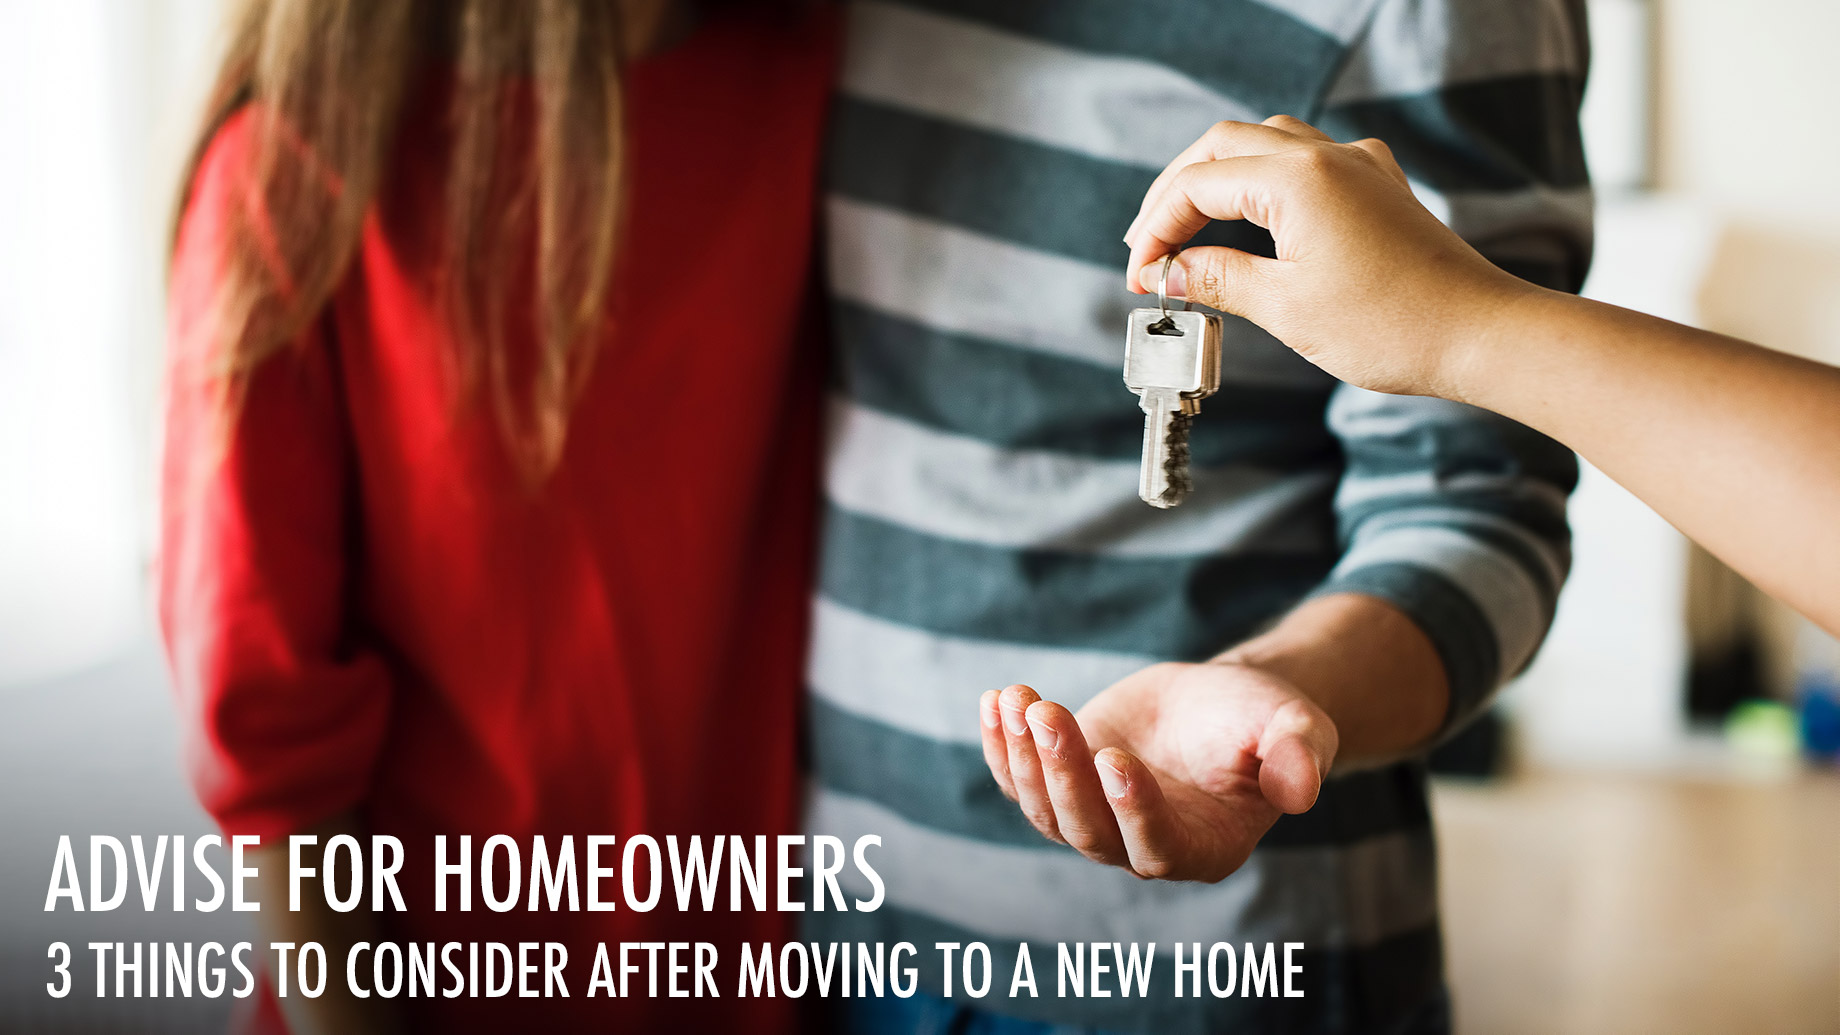 Advise for Homeowners - 3 Things to Consider After Moving to a New Home